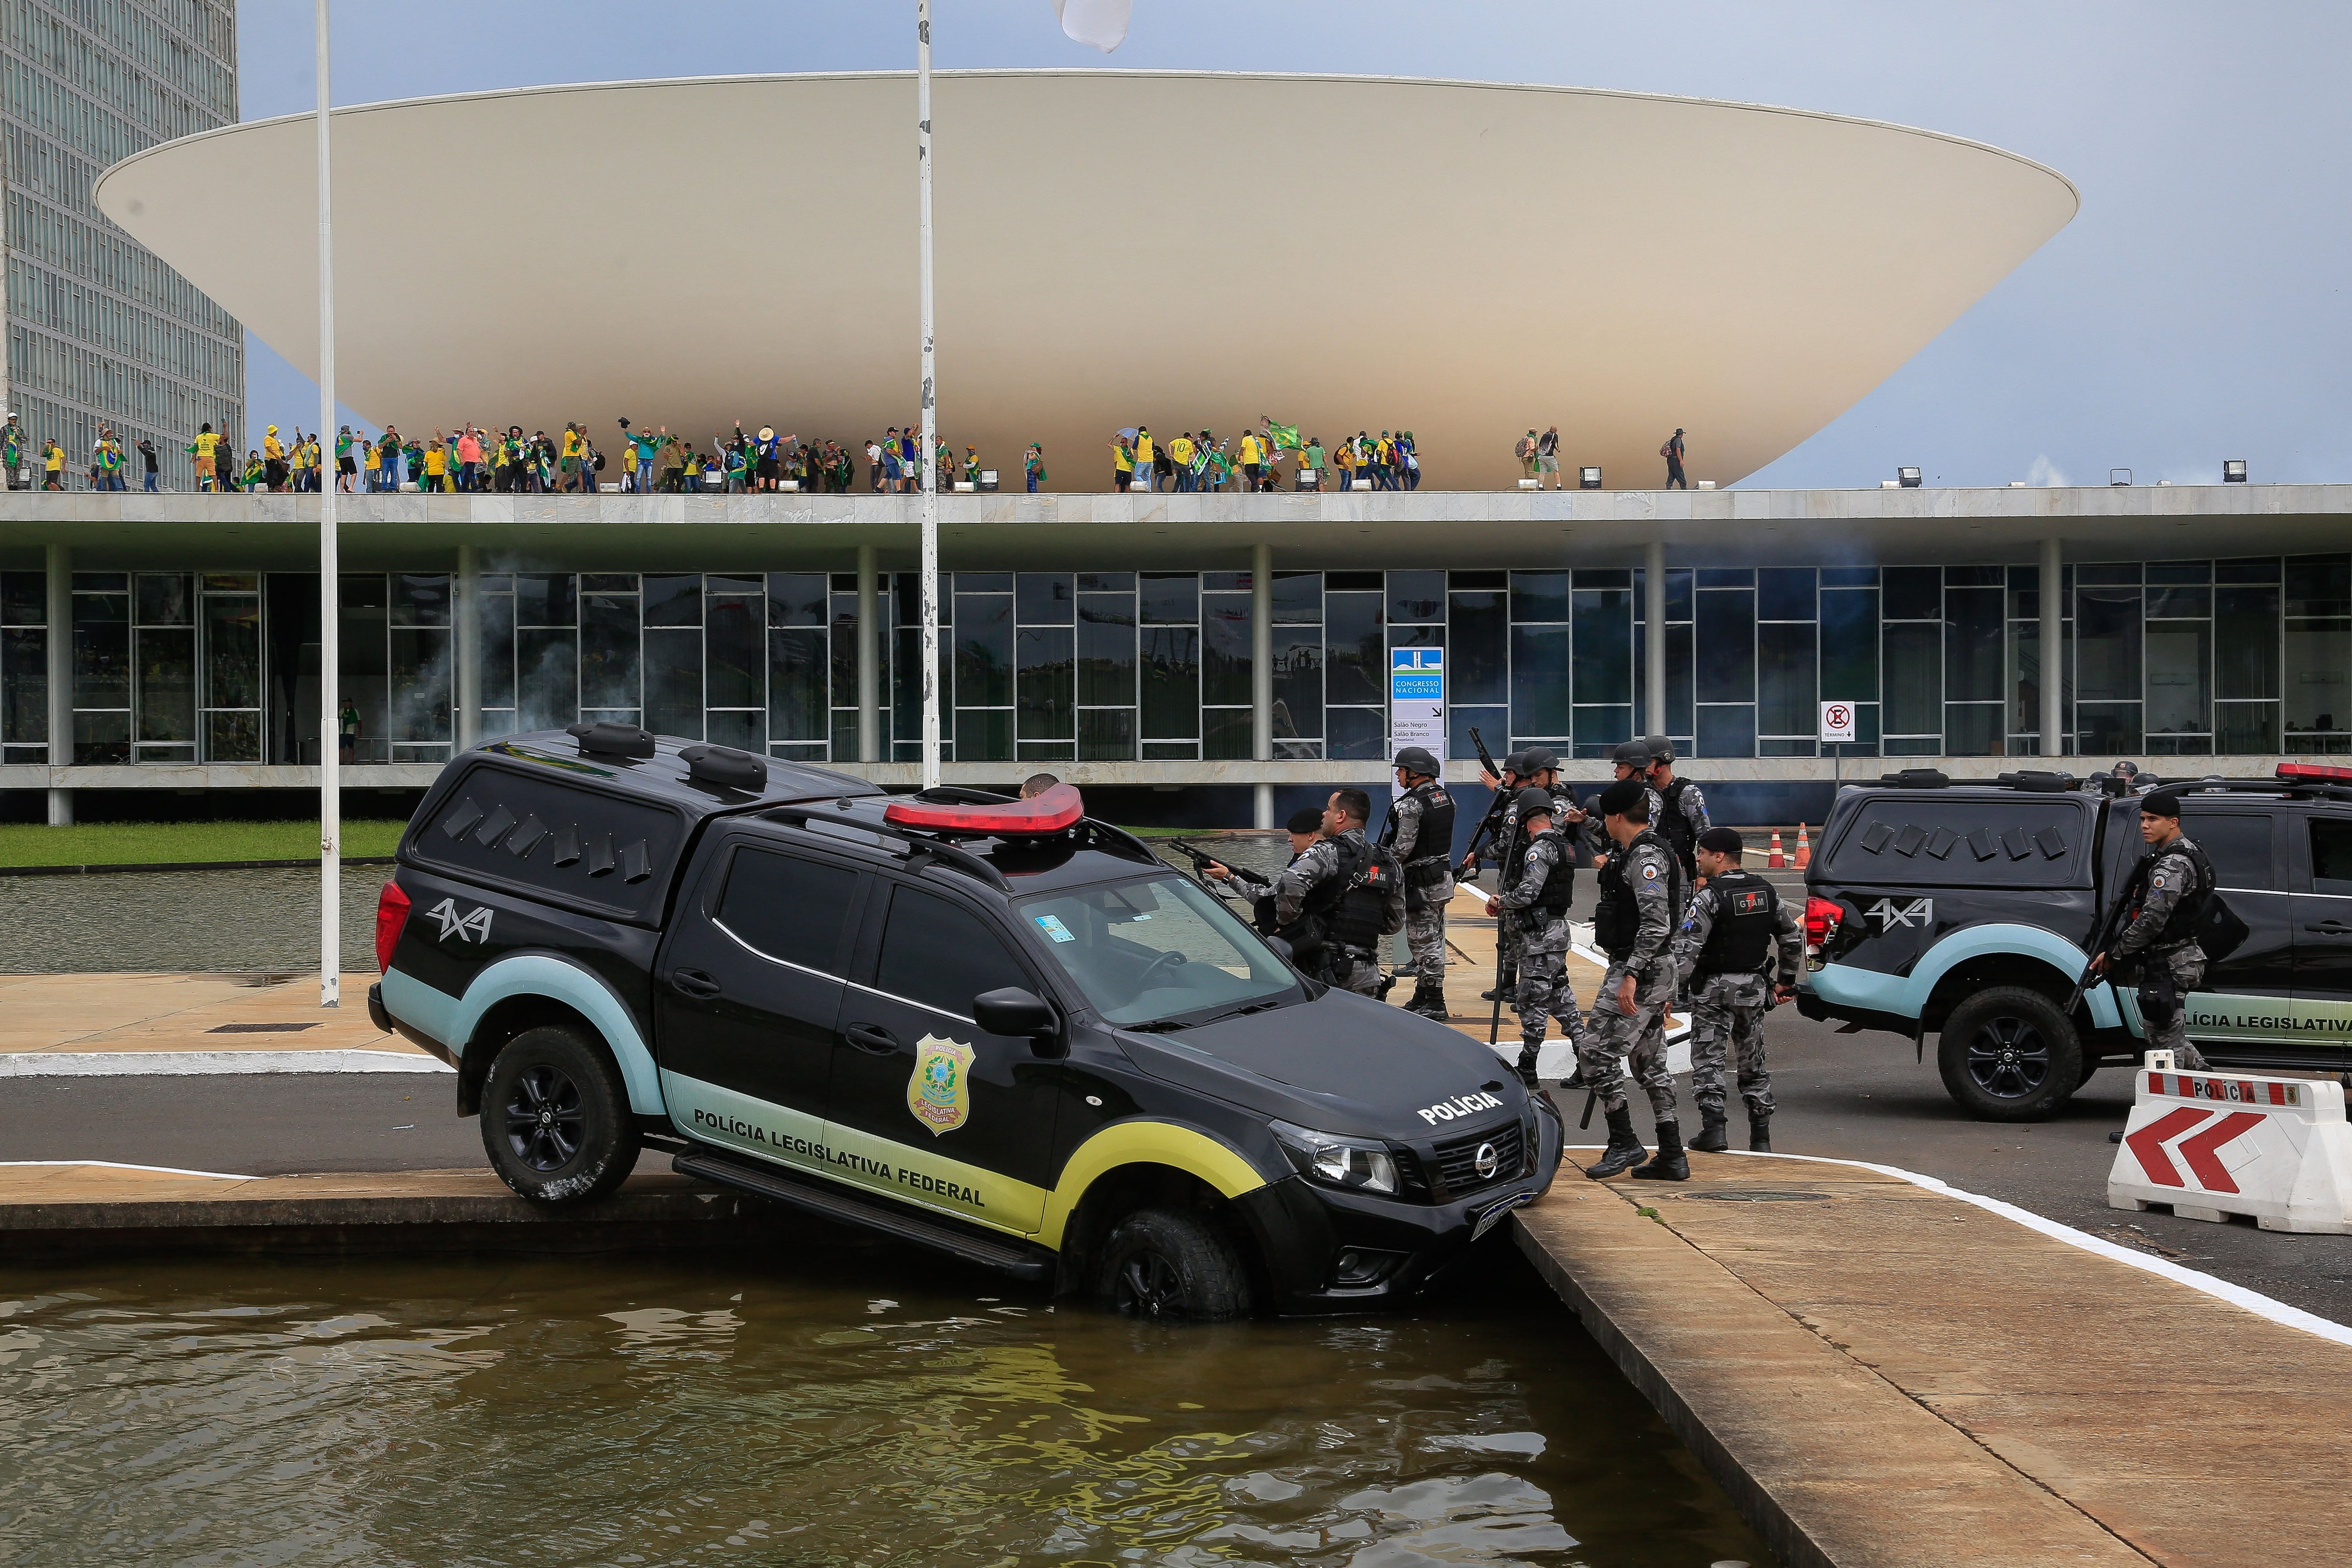 In this file photo taken on January 8, 2023, members of the Federal Legislative Police stand next to a vehicle that crashed into a fountain as supporters of former Brazilian President Jair Bolsonaro invaded the National Congress in Brasilia.